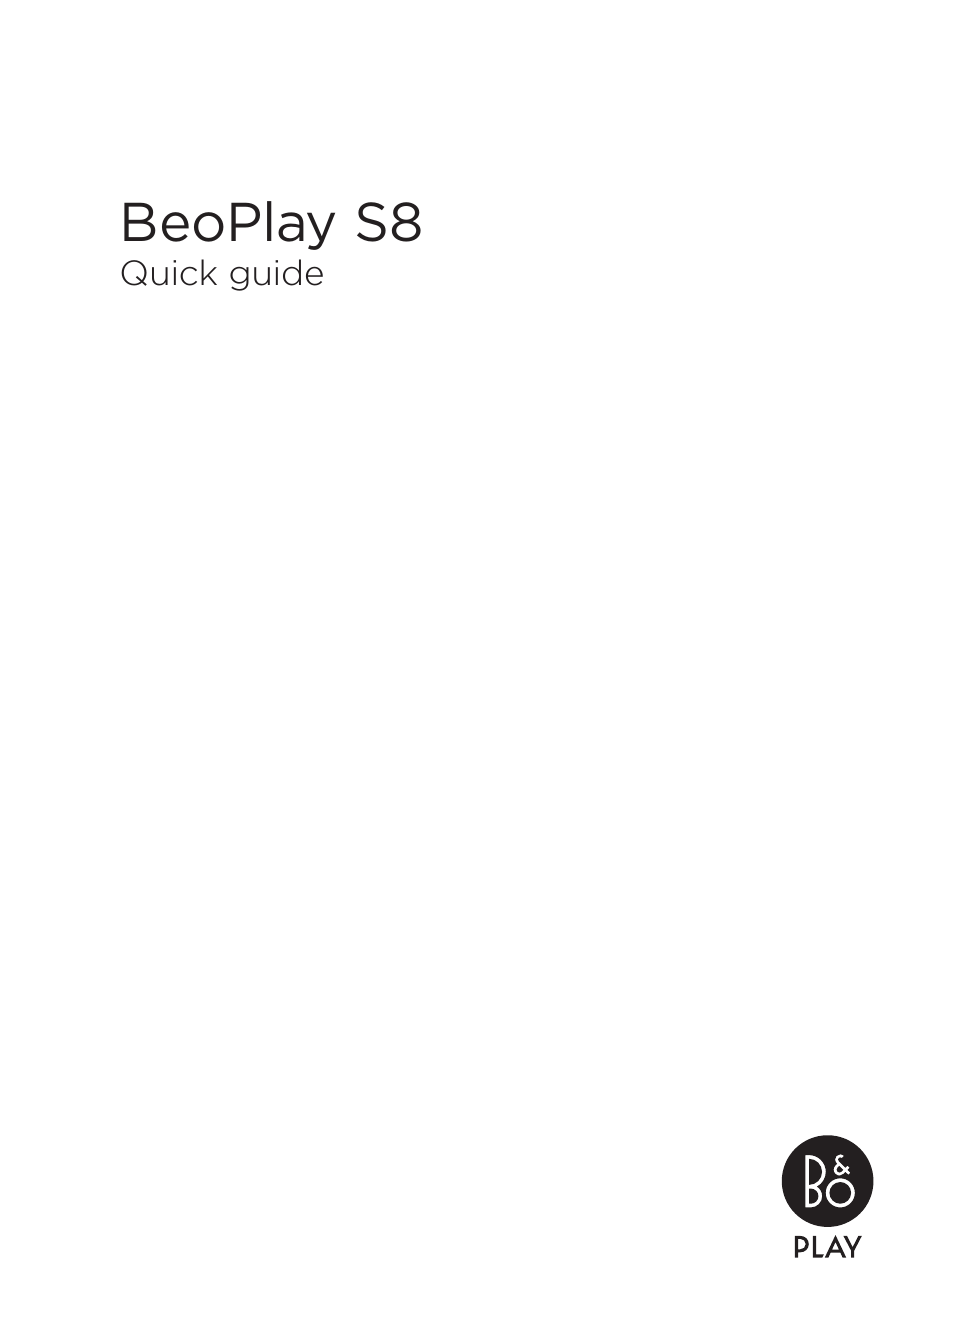 BeoPlay S8 - Quick Guide